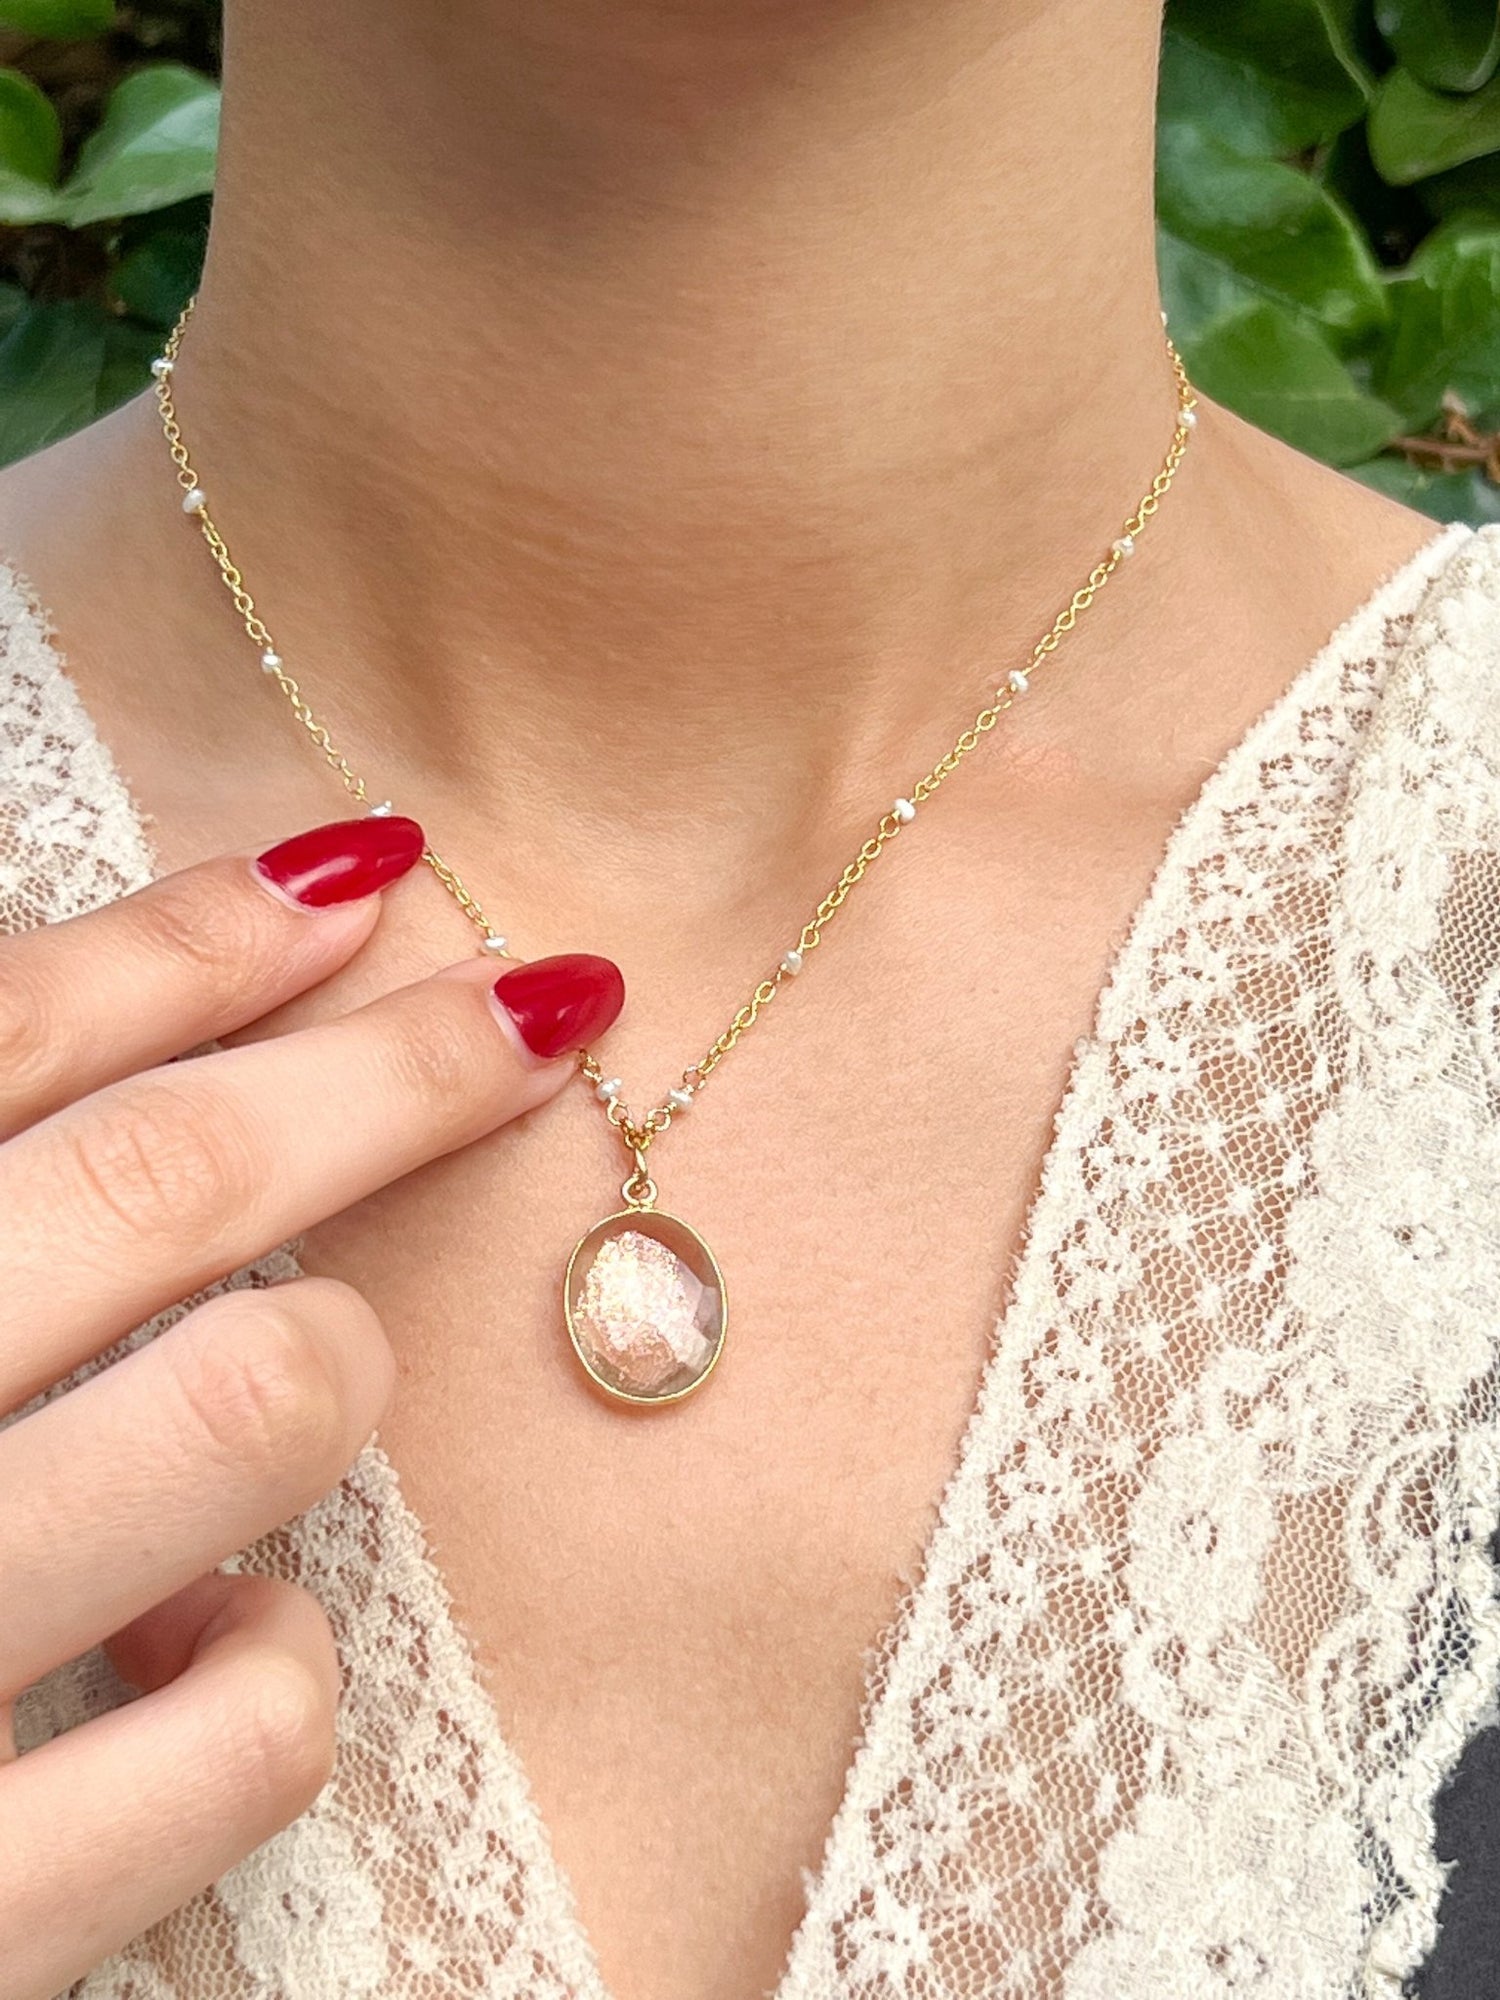 Sunstone Large Oval Pendant Necklace on Gold Chain with White Freshwat –  The Sage Lifestyle